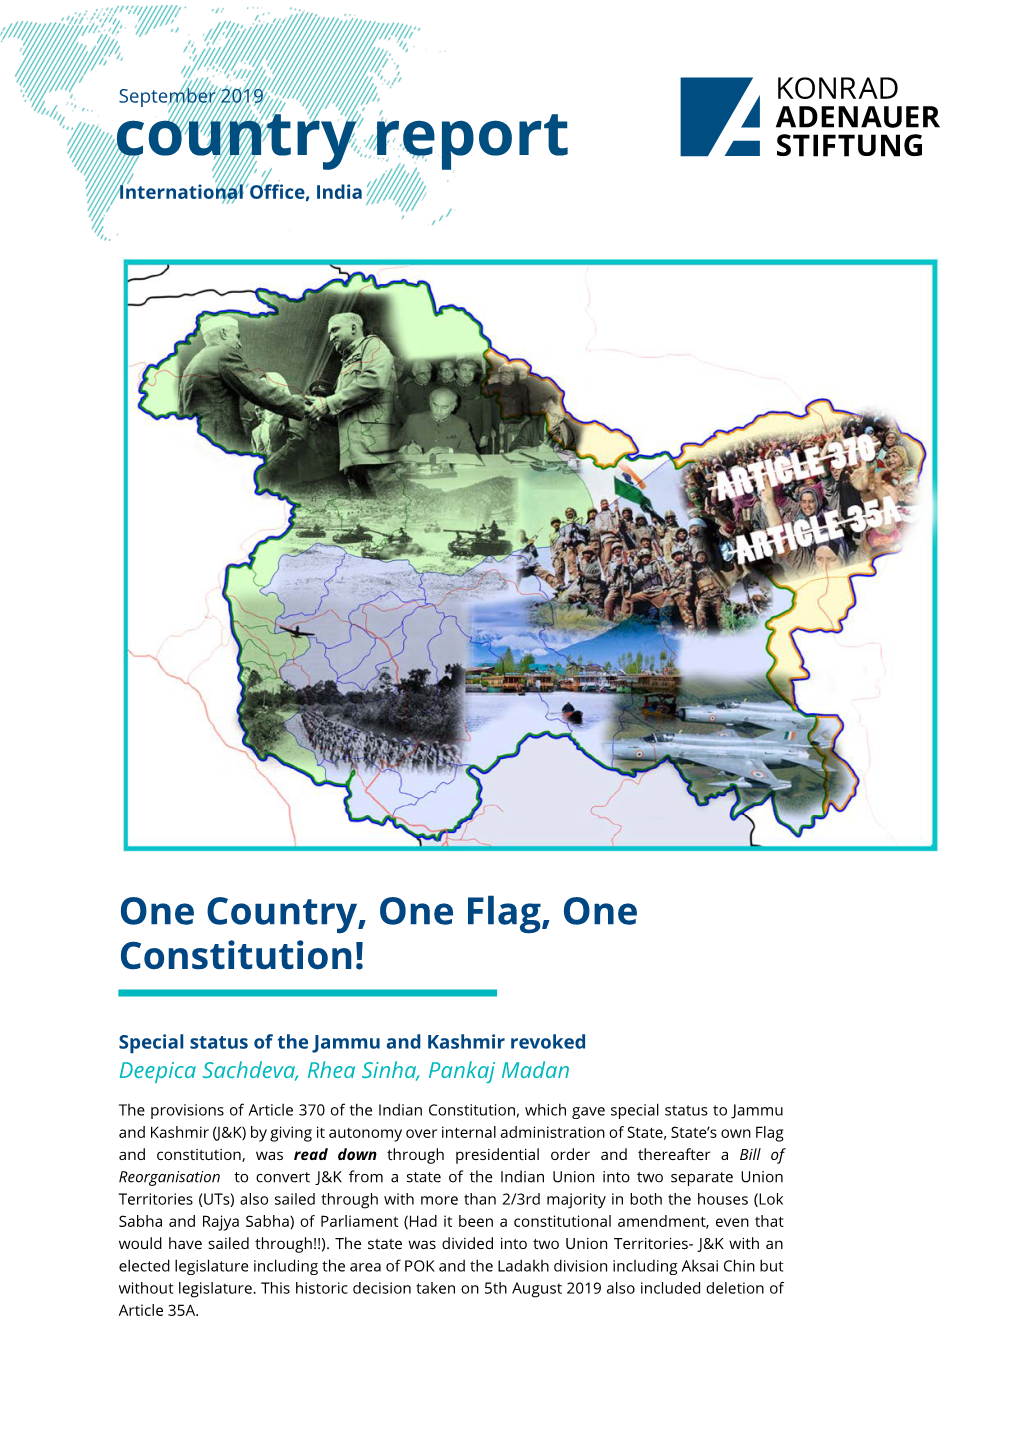 One Country, One Flag, One Constitution!